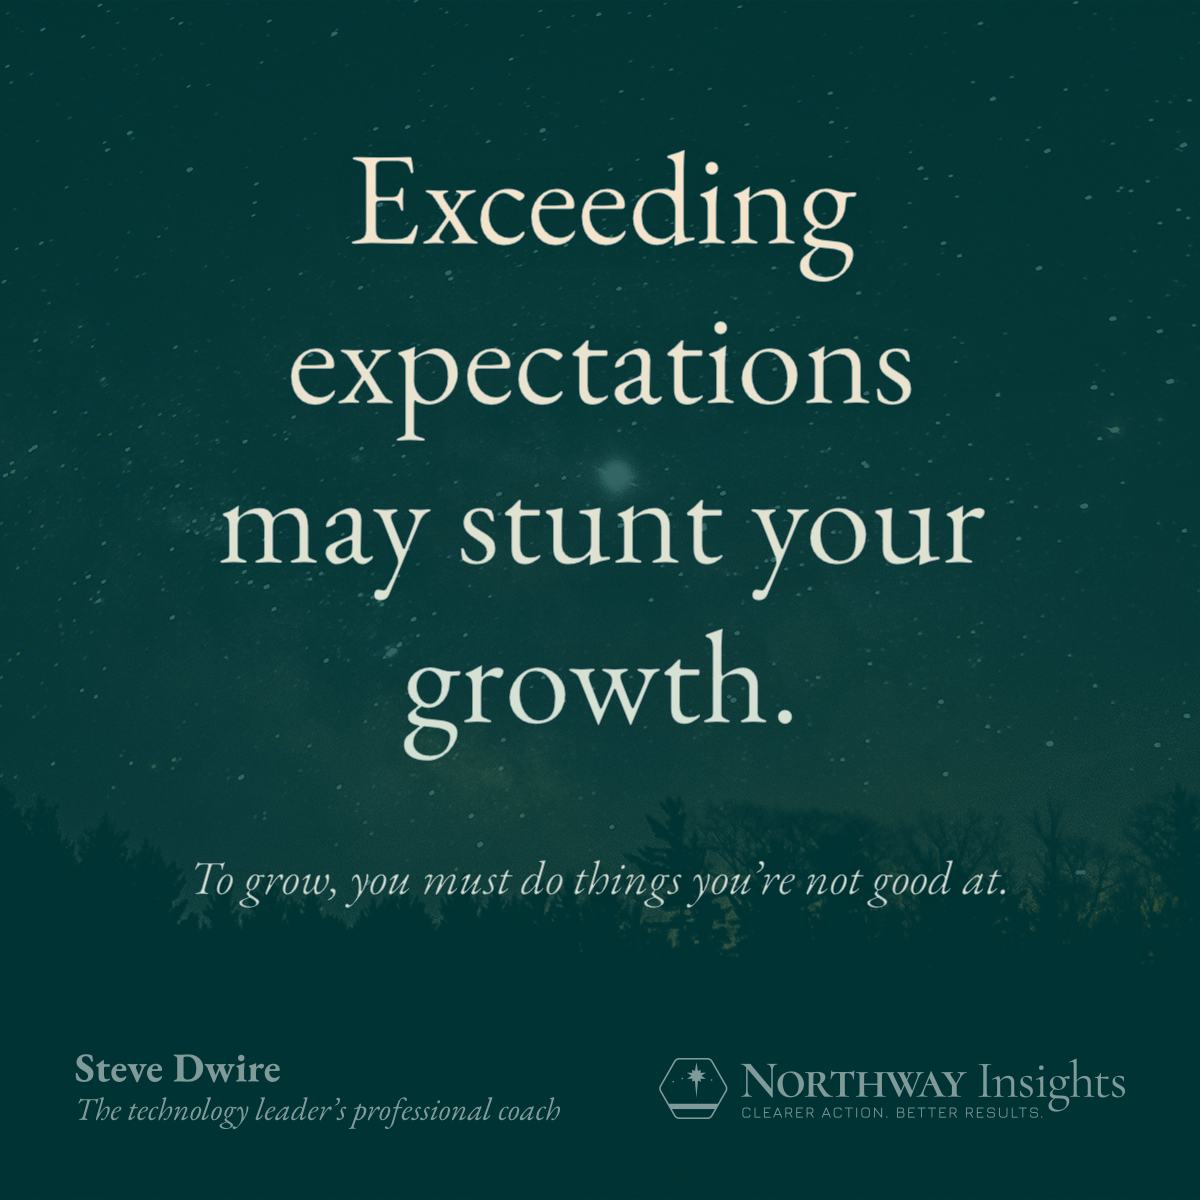 Exceeding expectations may stunt your growth